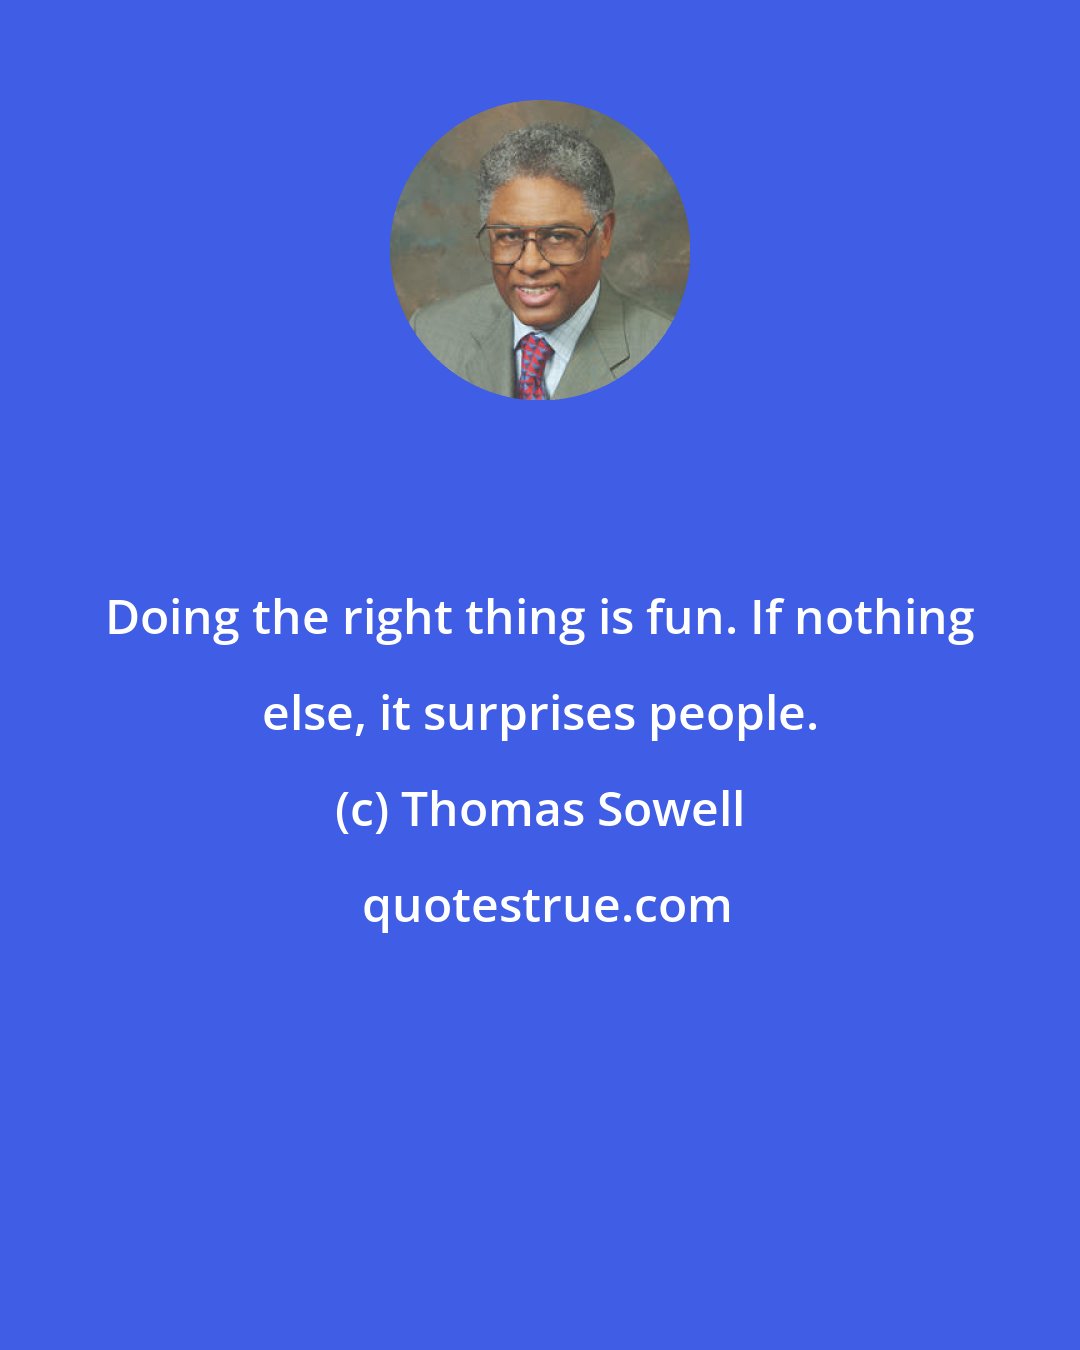 Thomas Sowell: Doing the right thing is fun. If nothing else, it surprises people.